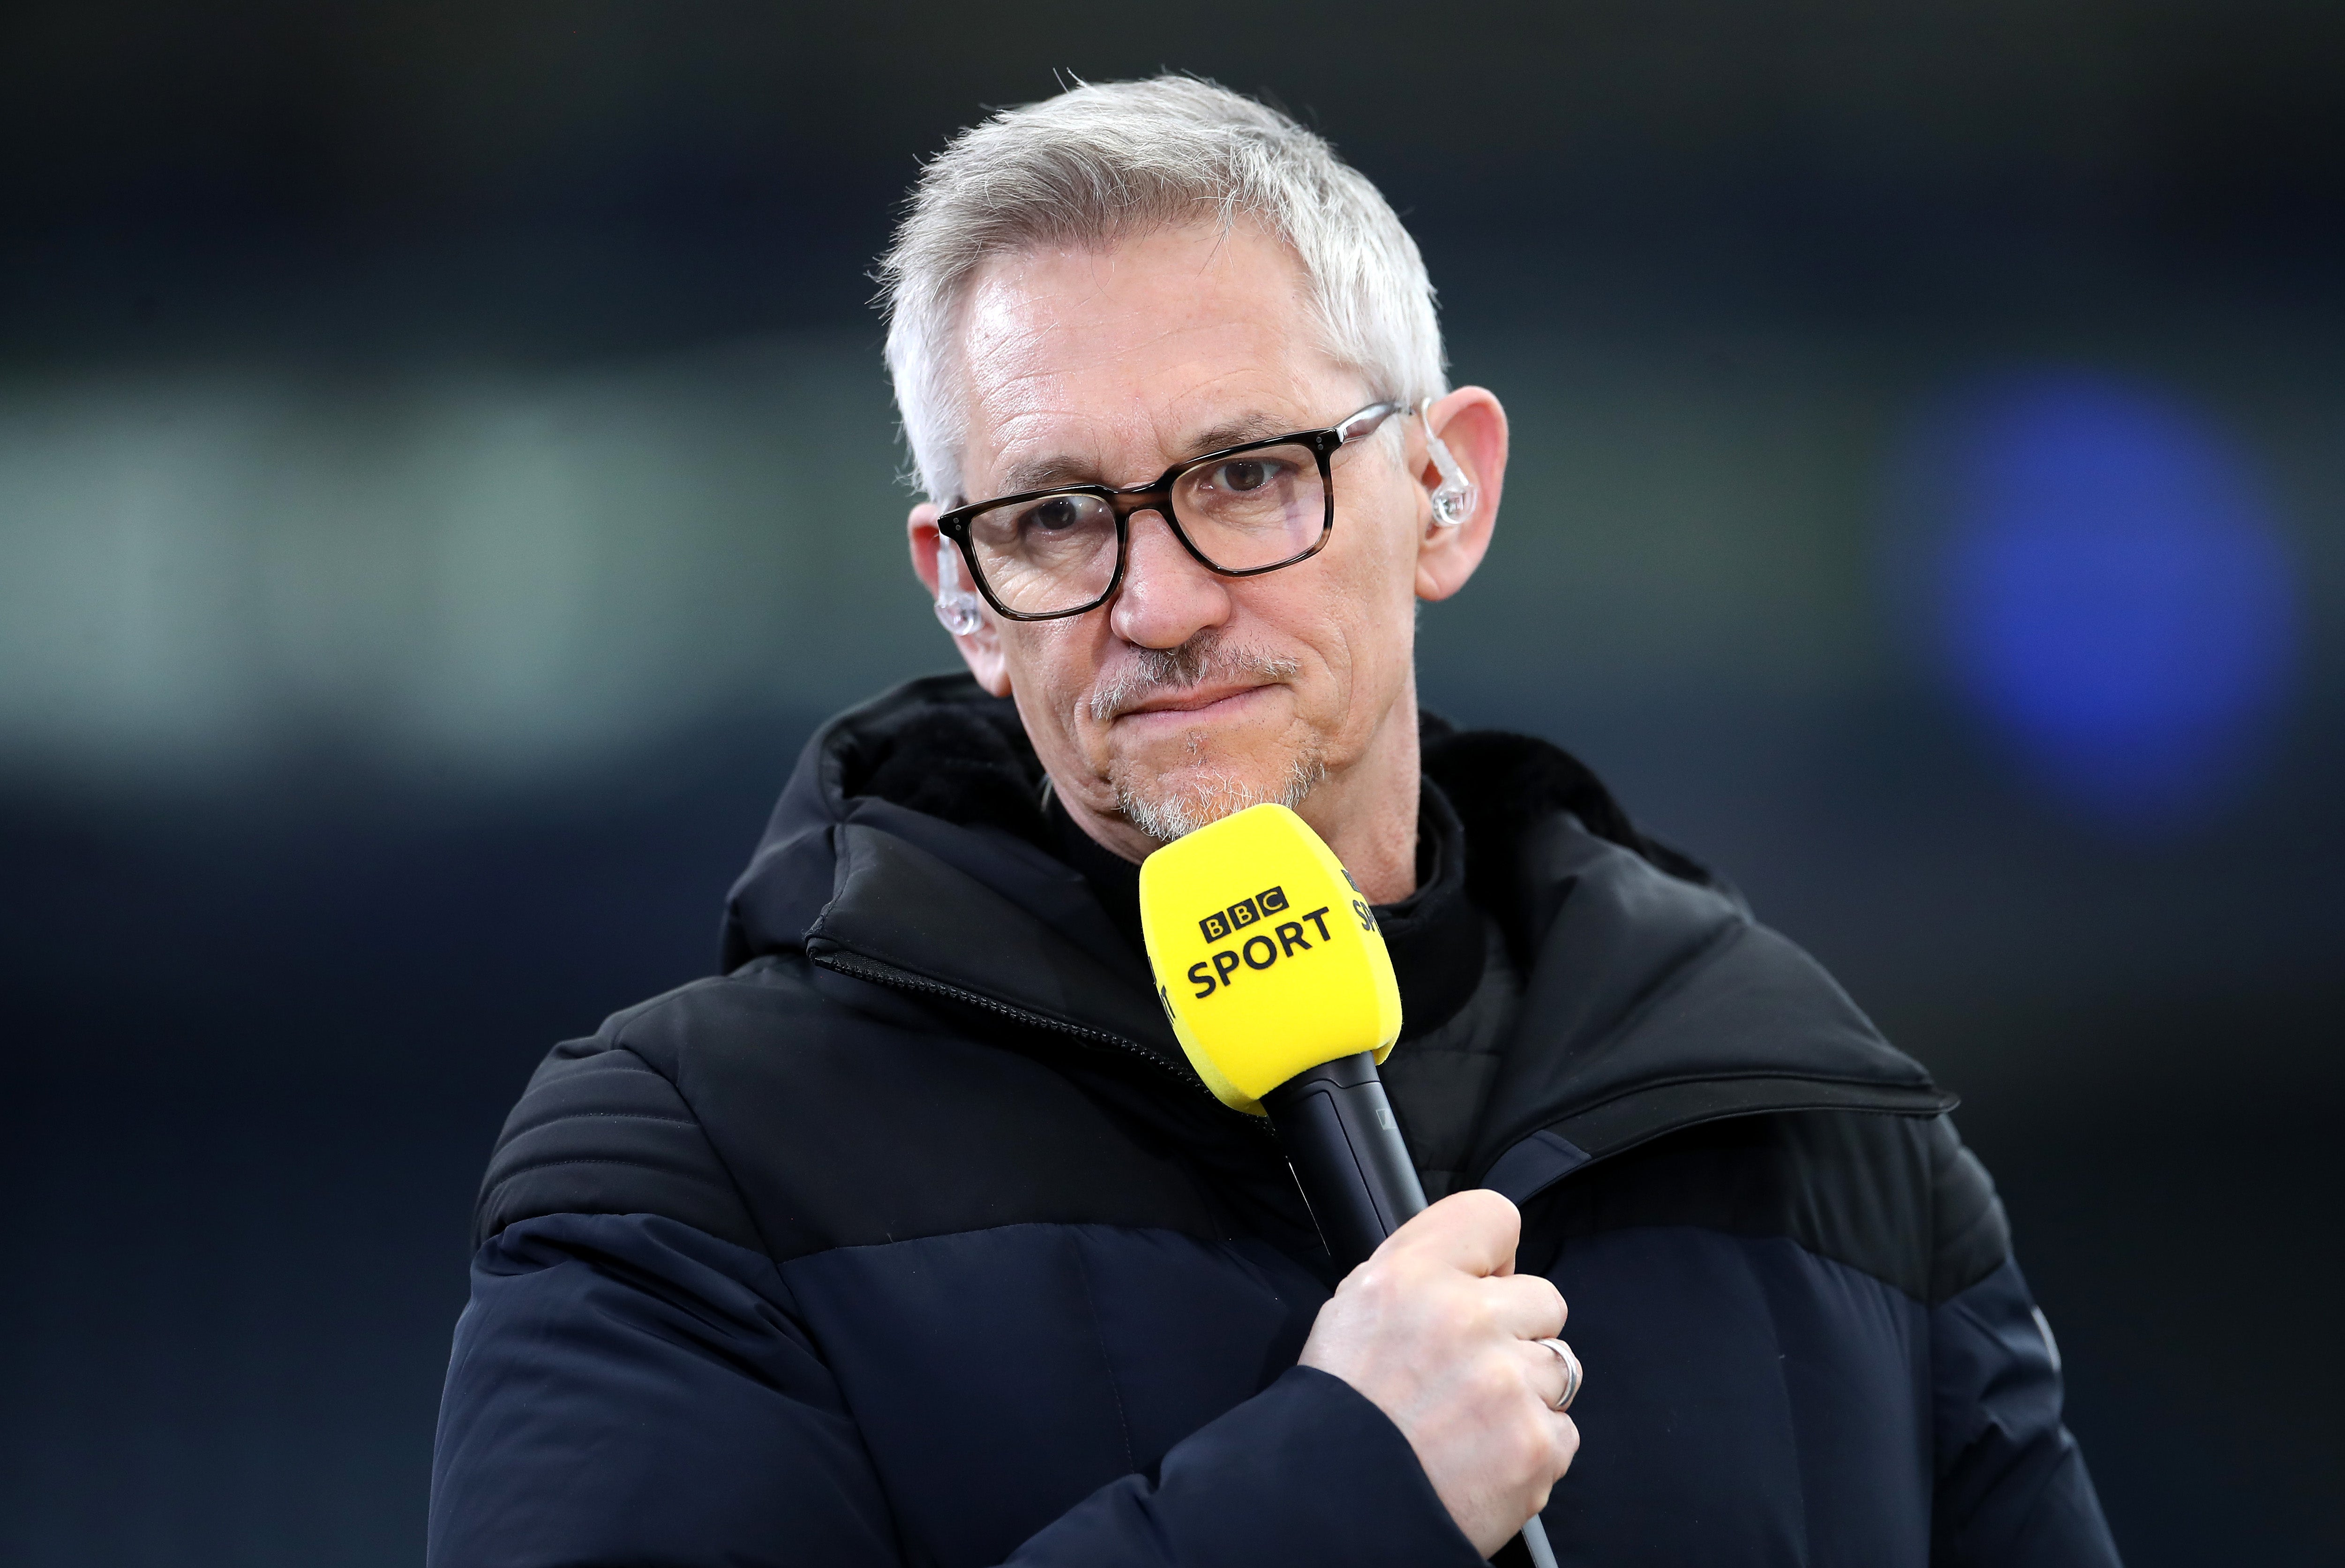 Gary Lineker has broken his silence after the Match of the Day presenter was taken off air